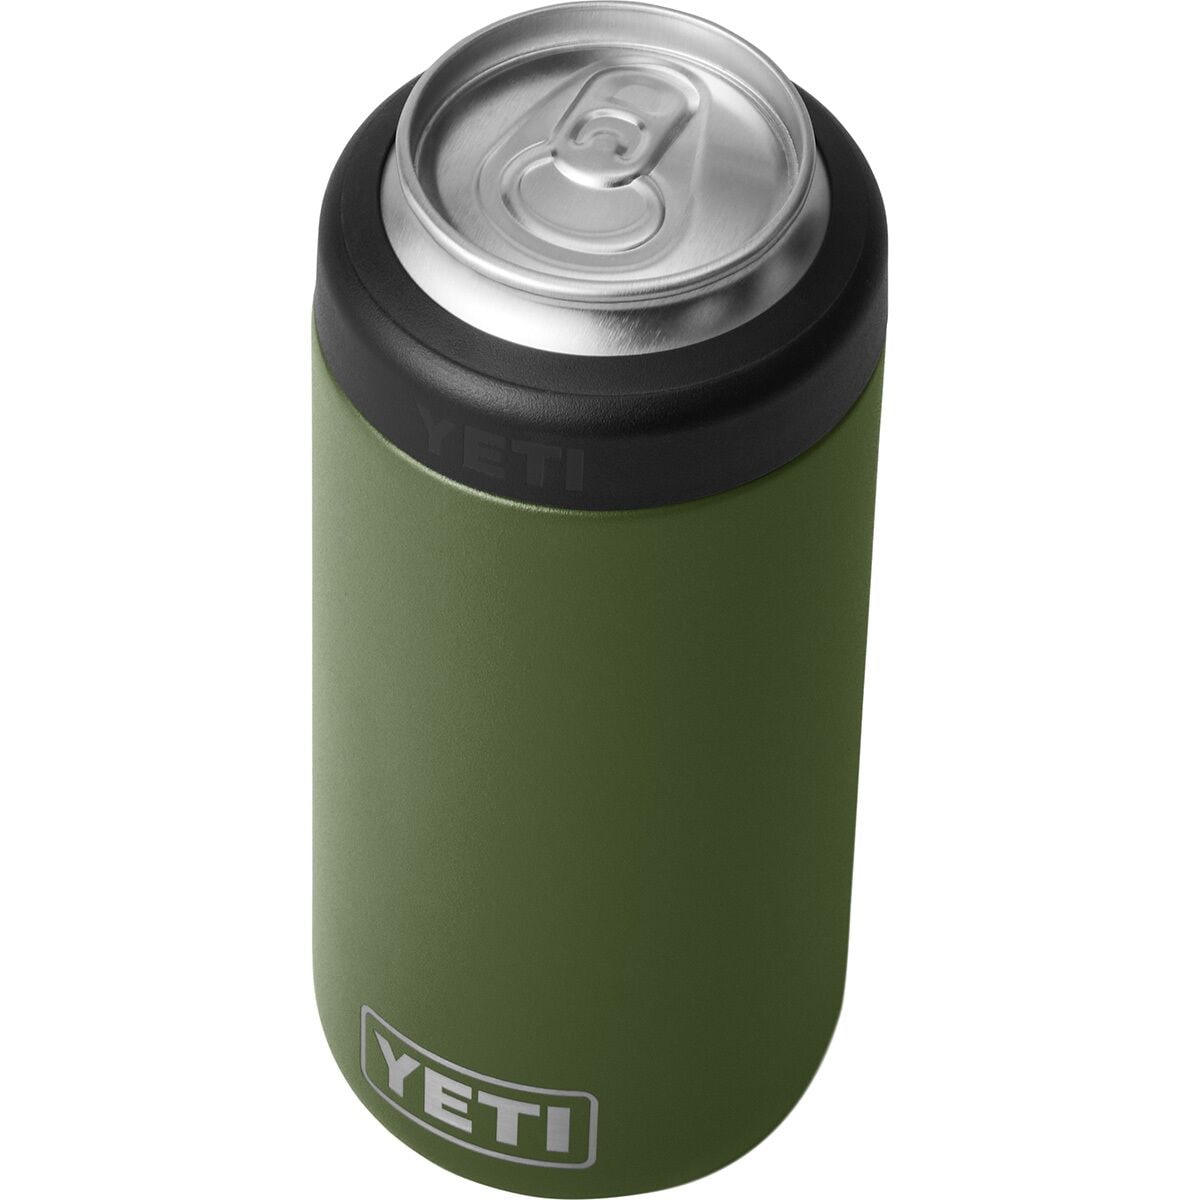 Yeti Colster 16oz to 12oz Slim Cans Adapter 